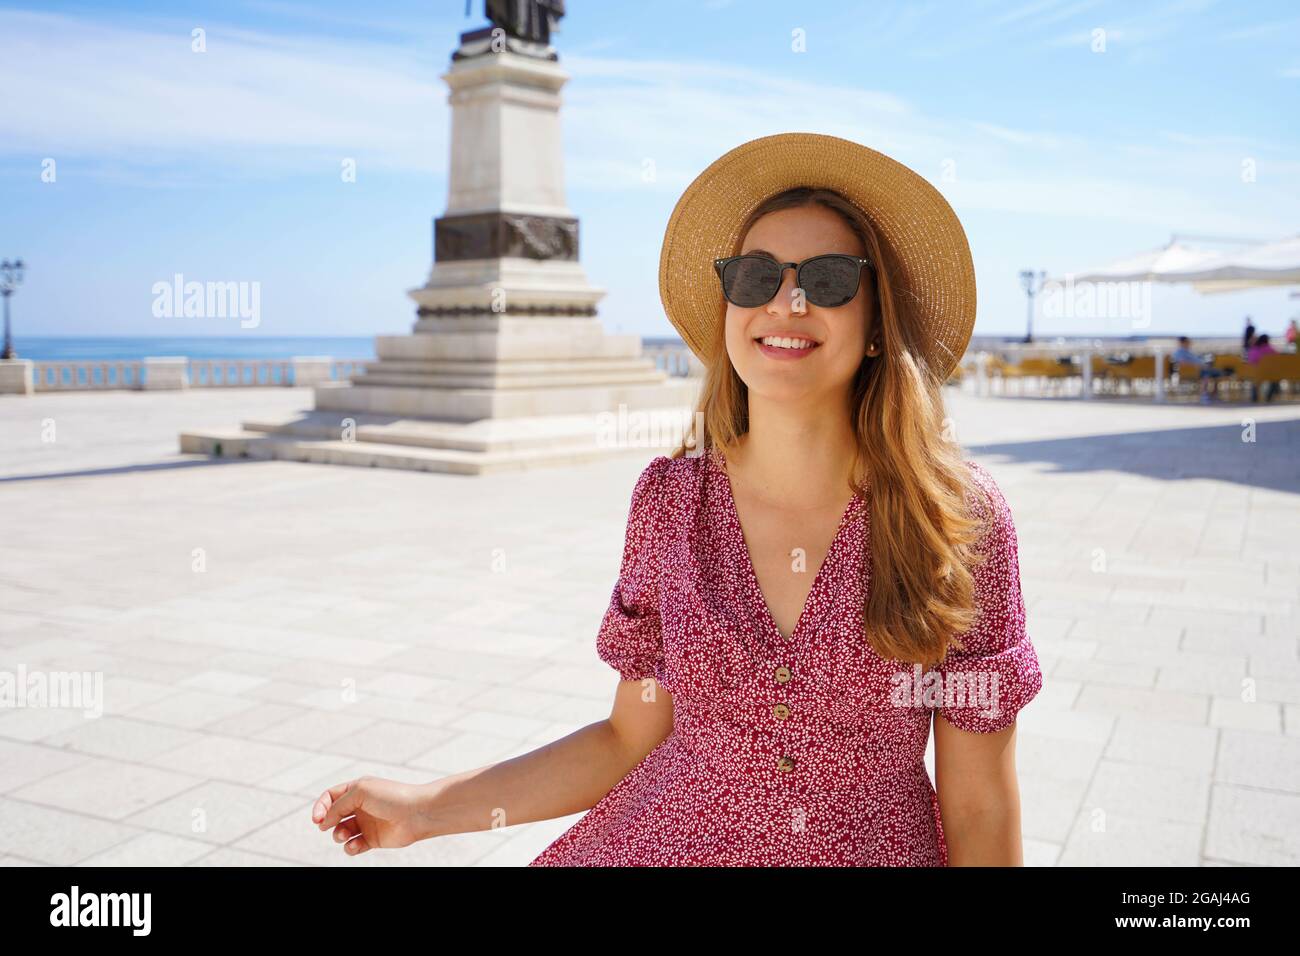 Welcome in Apulia. Portrait of pretty stylish girl smiling looking at camera in Otranto, Salento, Italy. Stock Photo